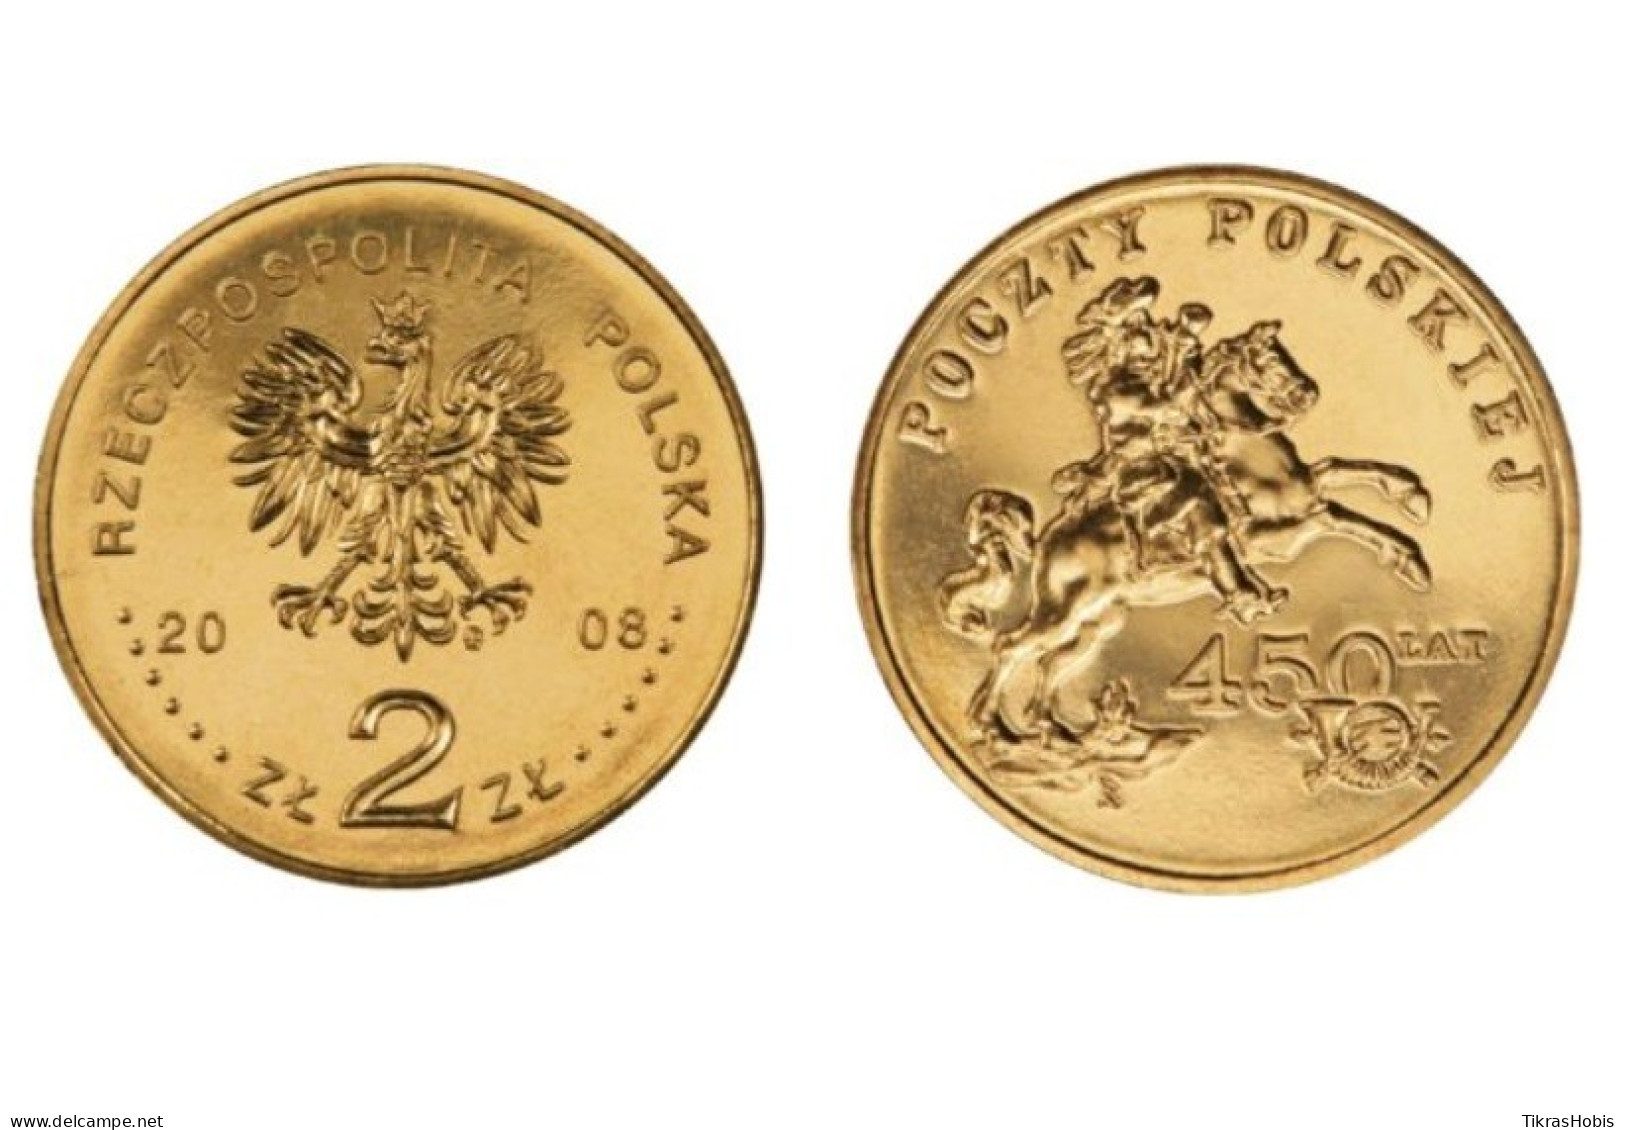 Poland 2 Zlotys, 2008 450 Years For Polish Post Y656 - Pologne